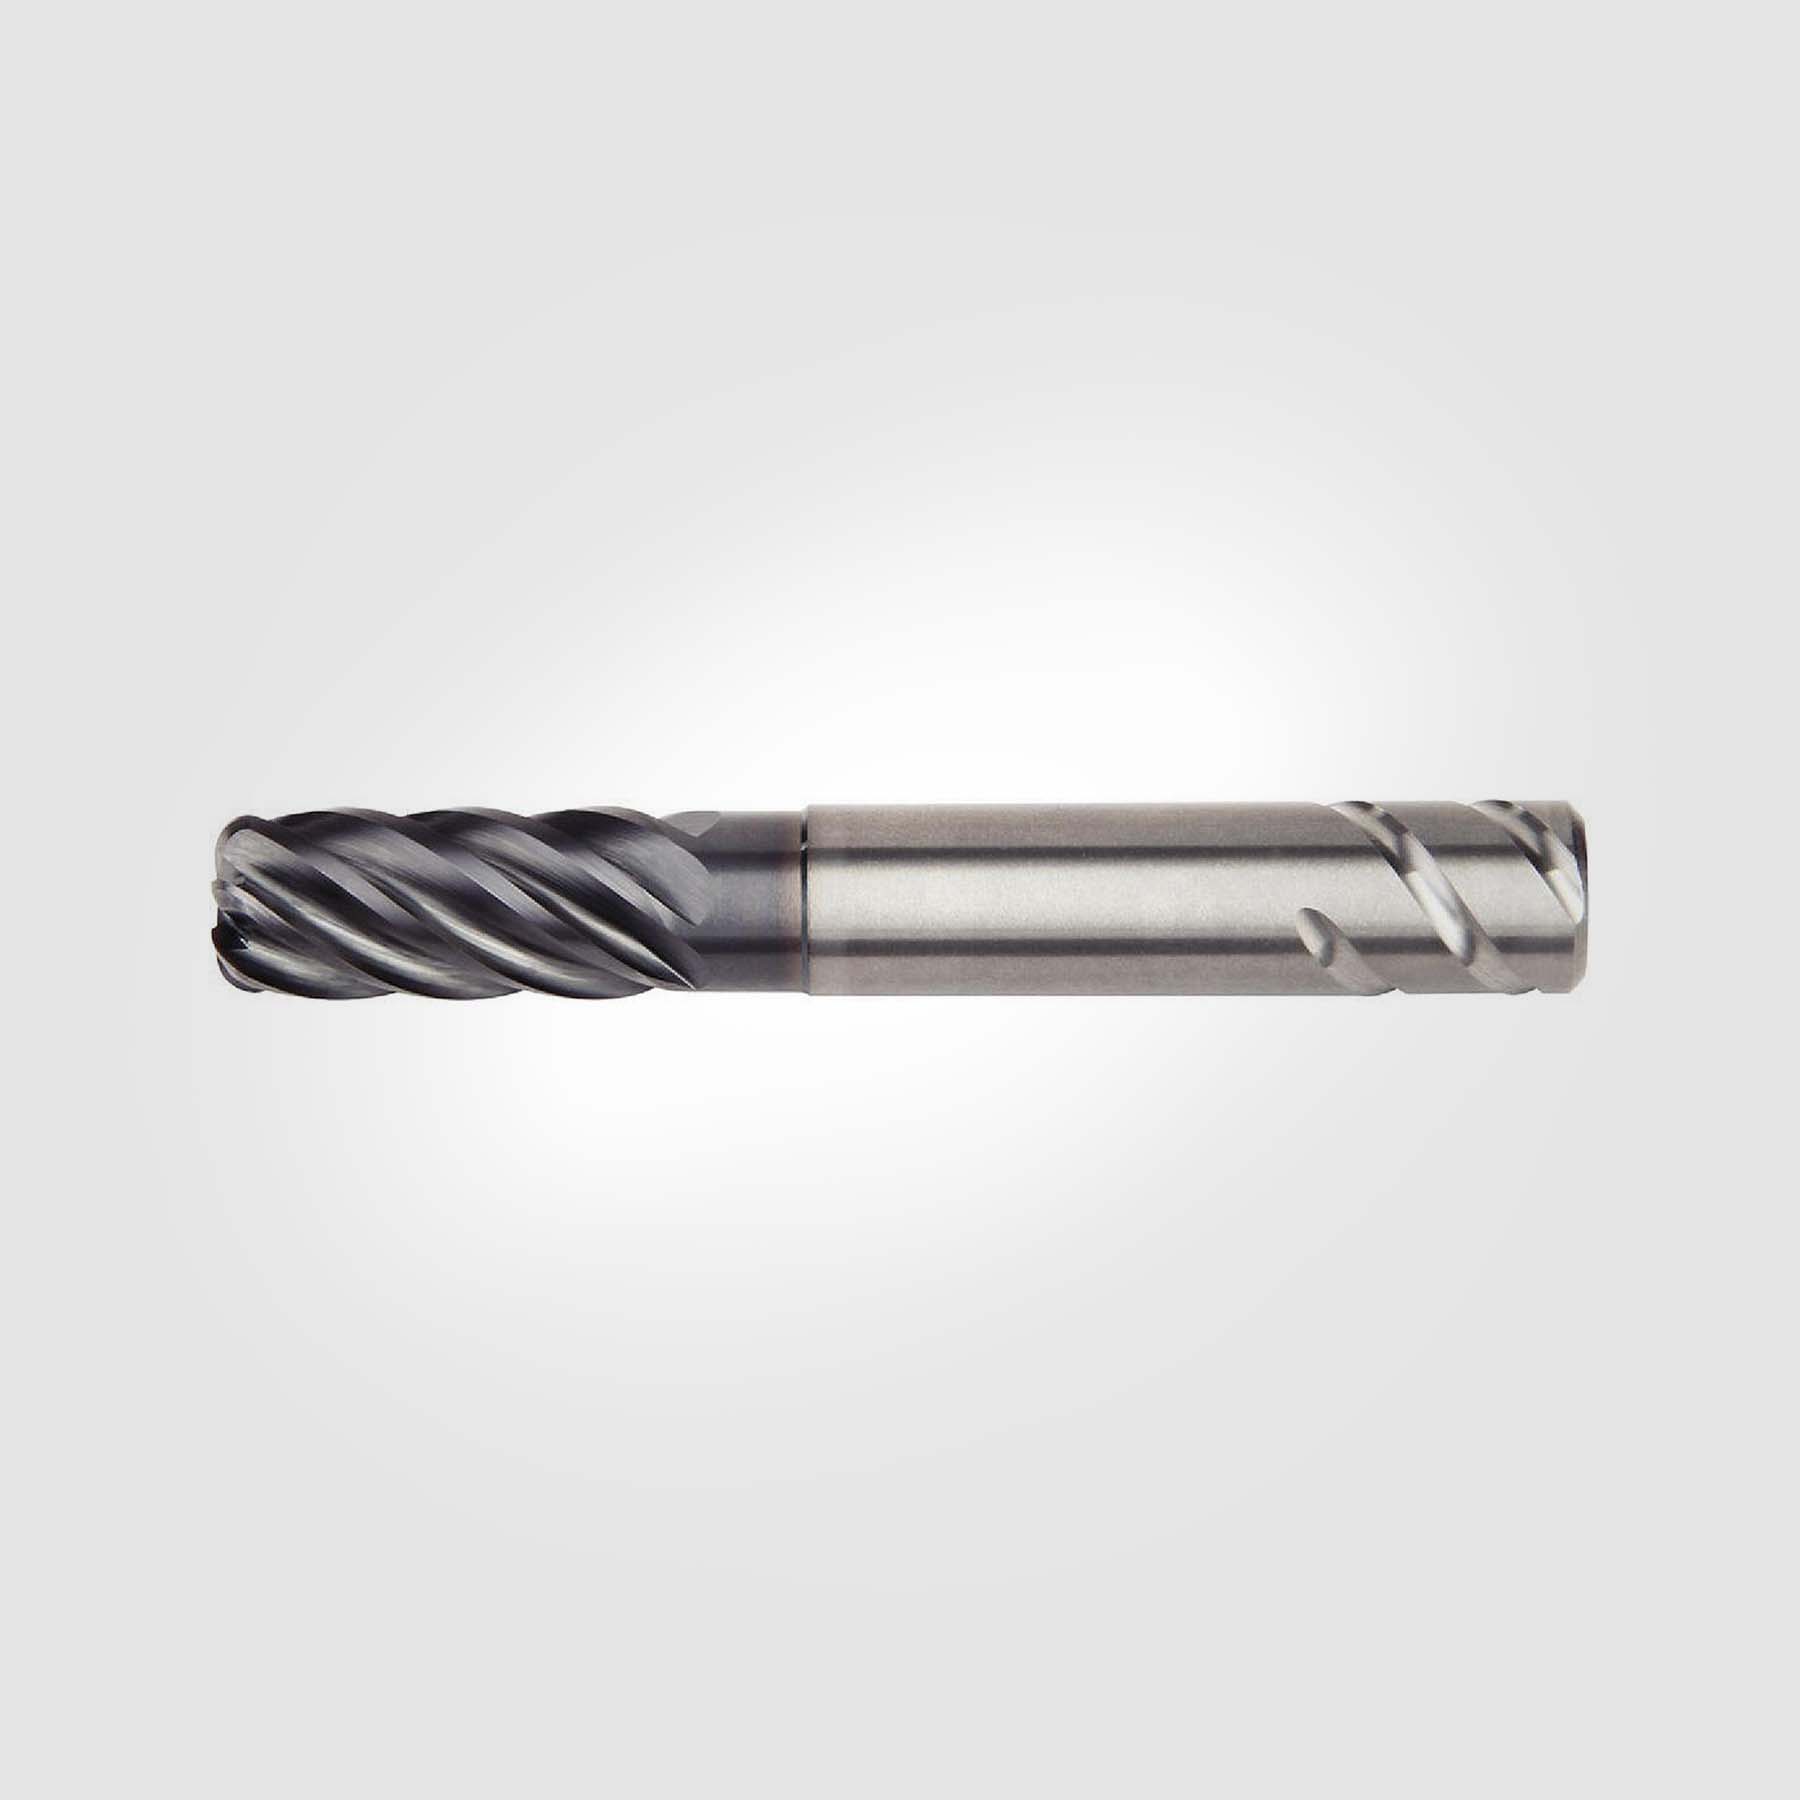 HARVI III | 1" x 1" x 1 3/4" x 5 1/2" | SOLID CARBIDE NECKED ENDMILL 6 FLUTE | 5351939